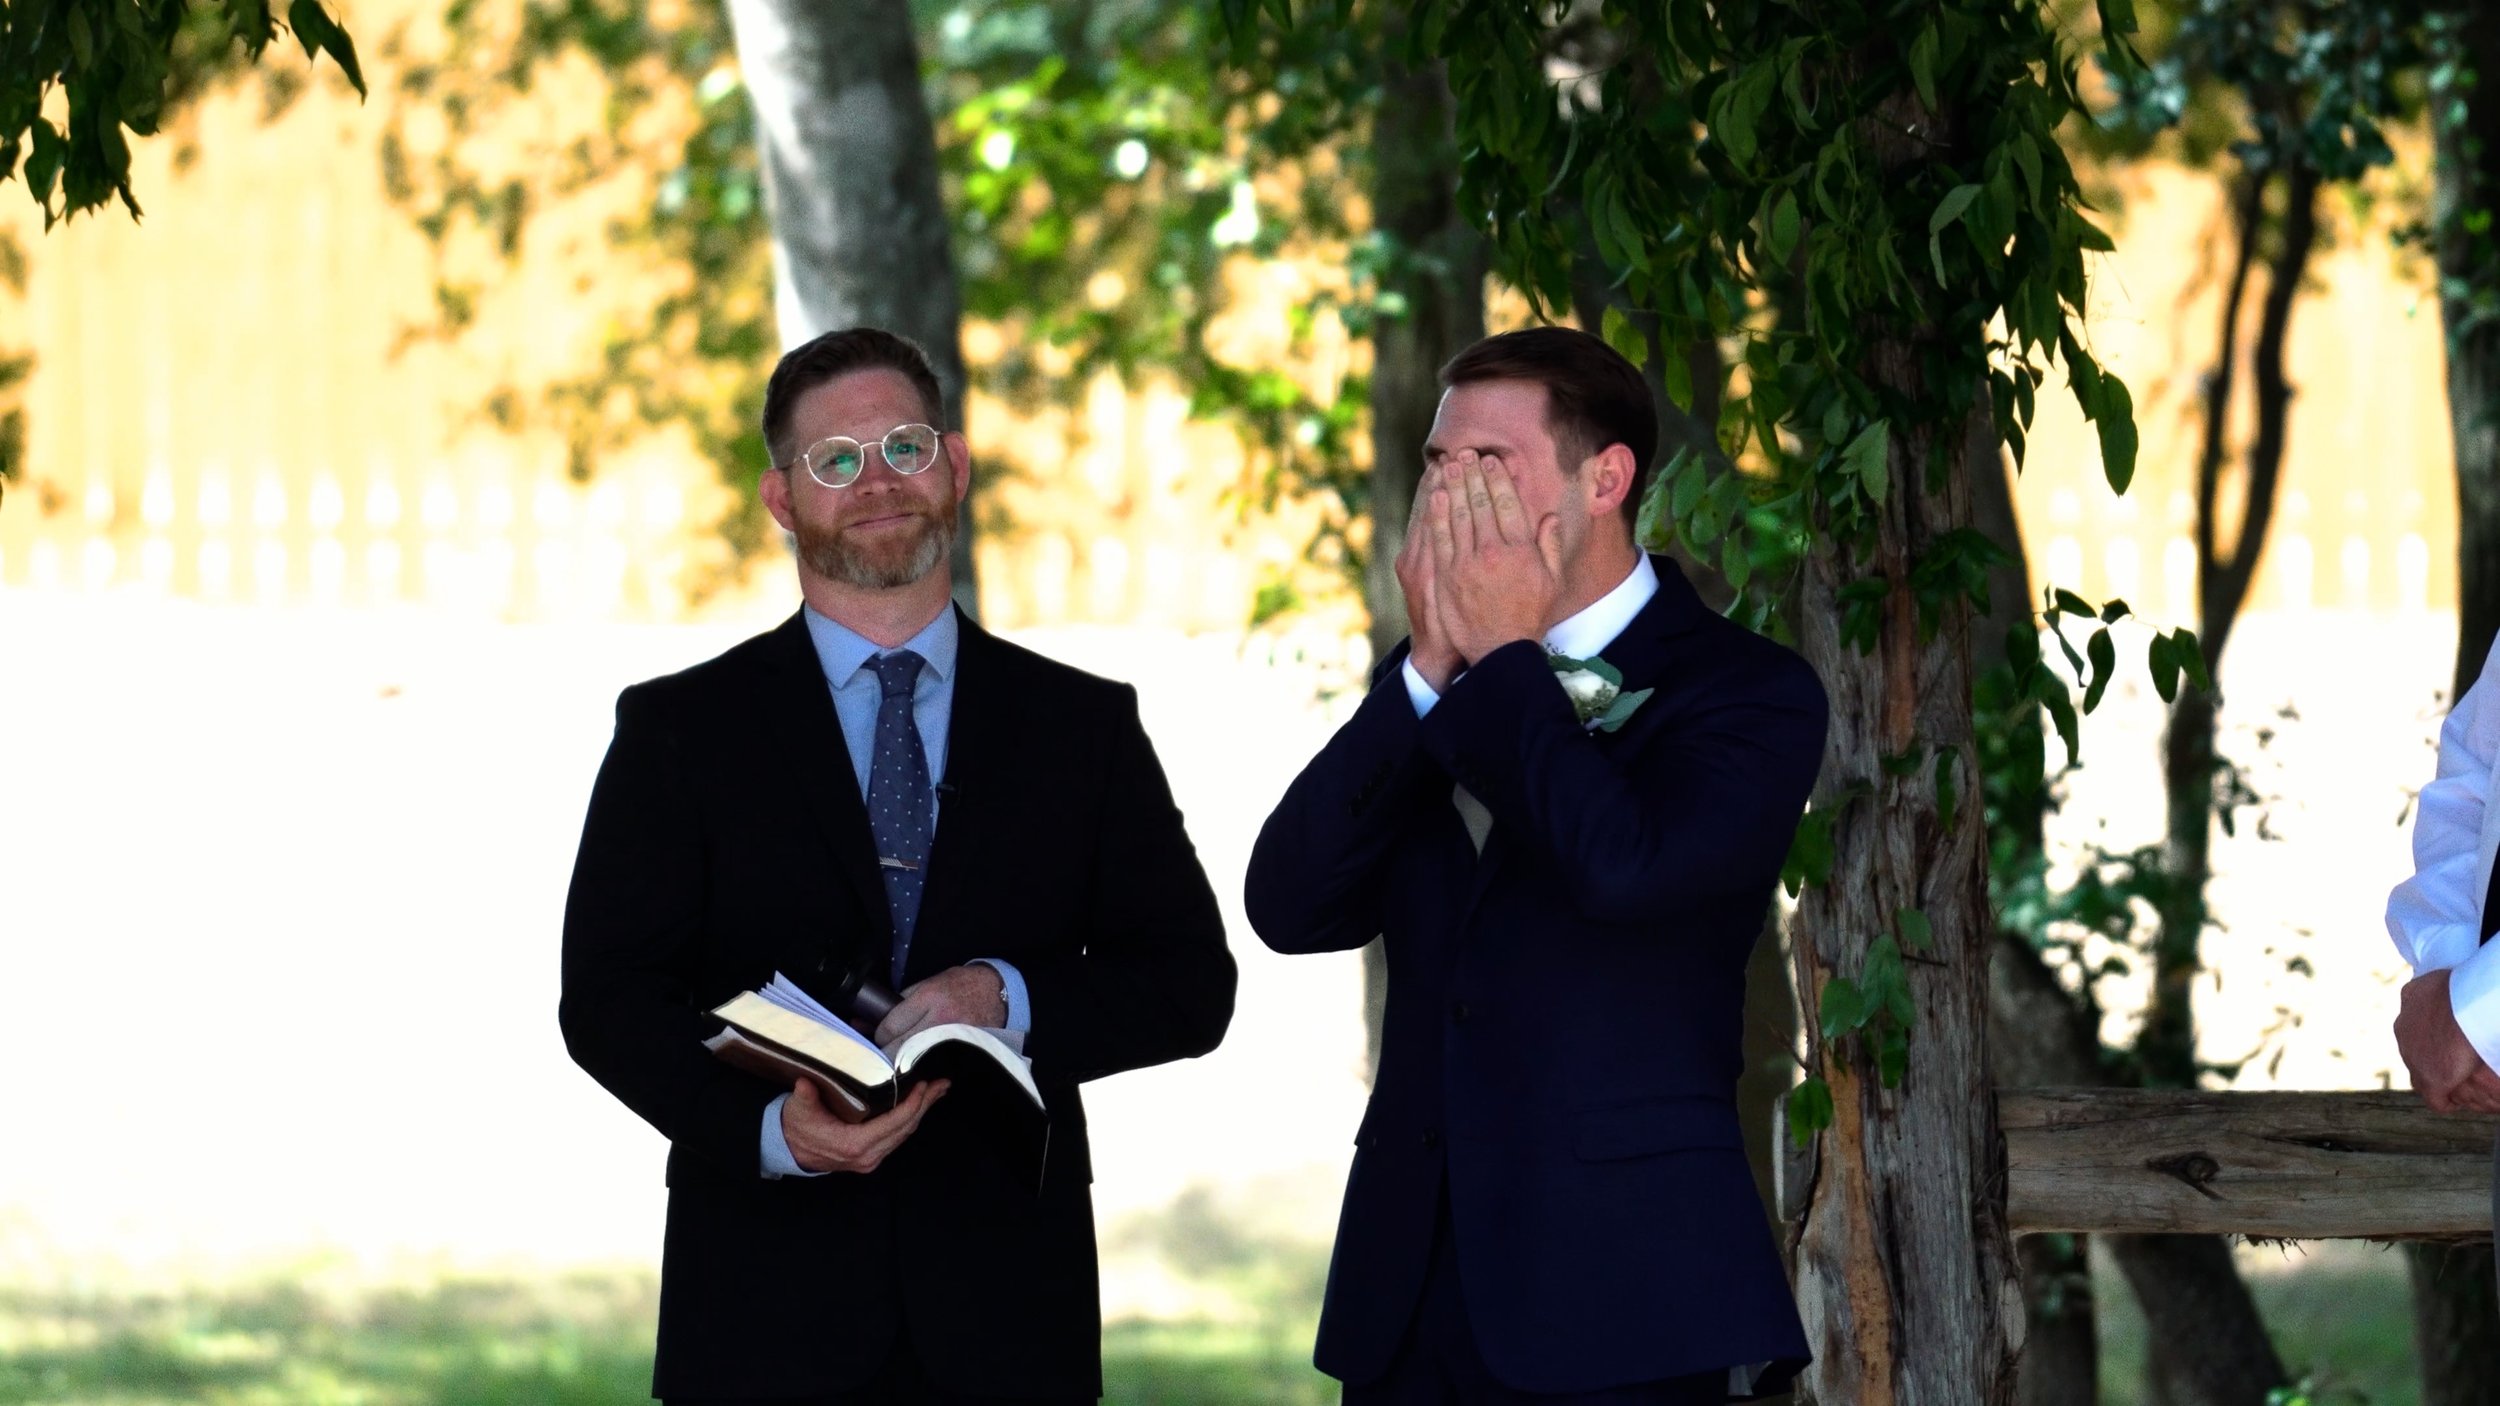 emotional groom crying seeing bride walk down aisle at wedding ceremony covers face